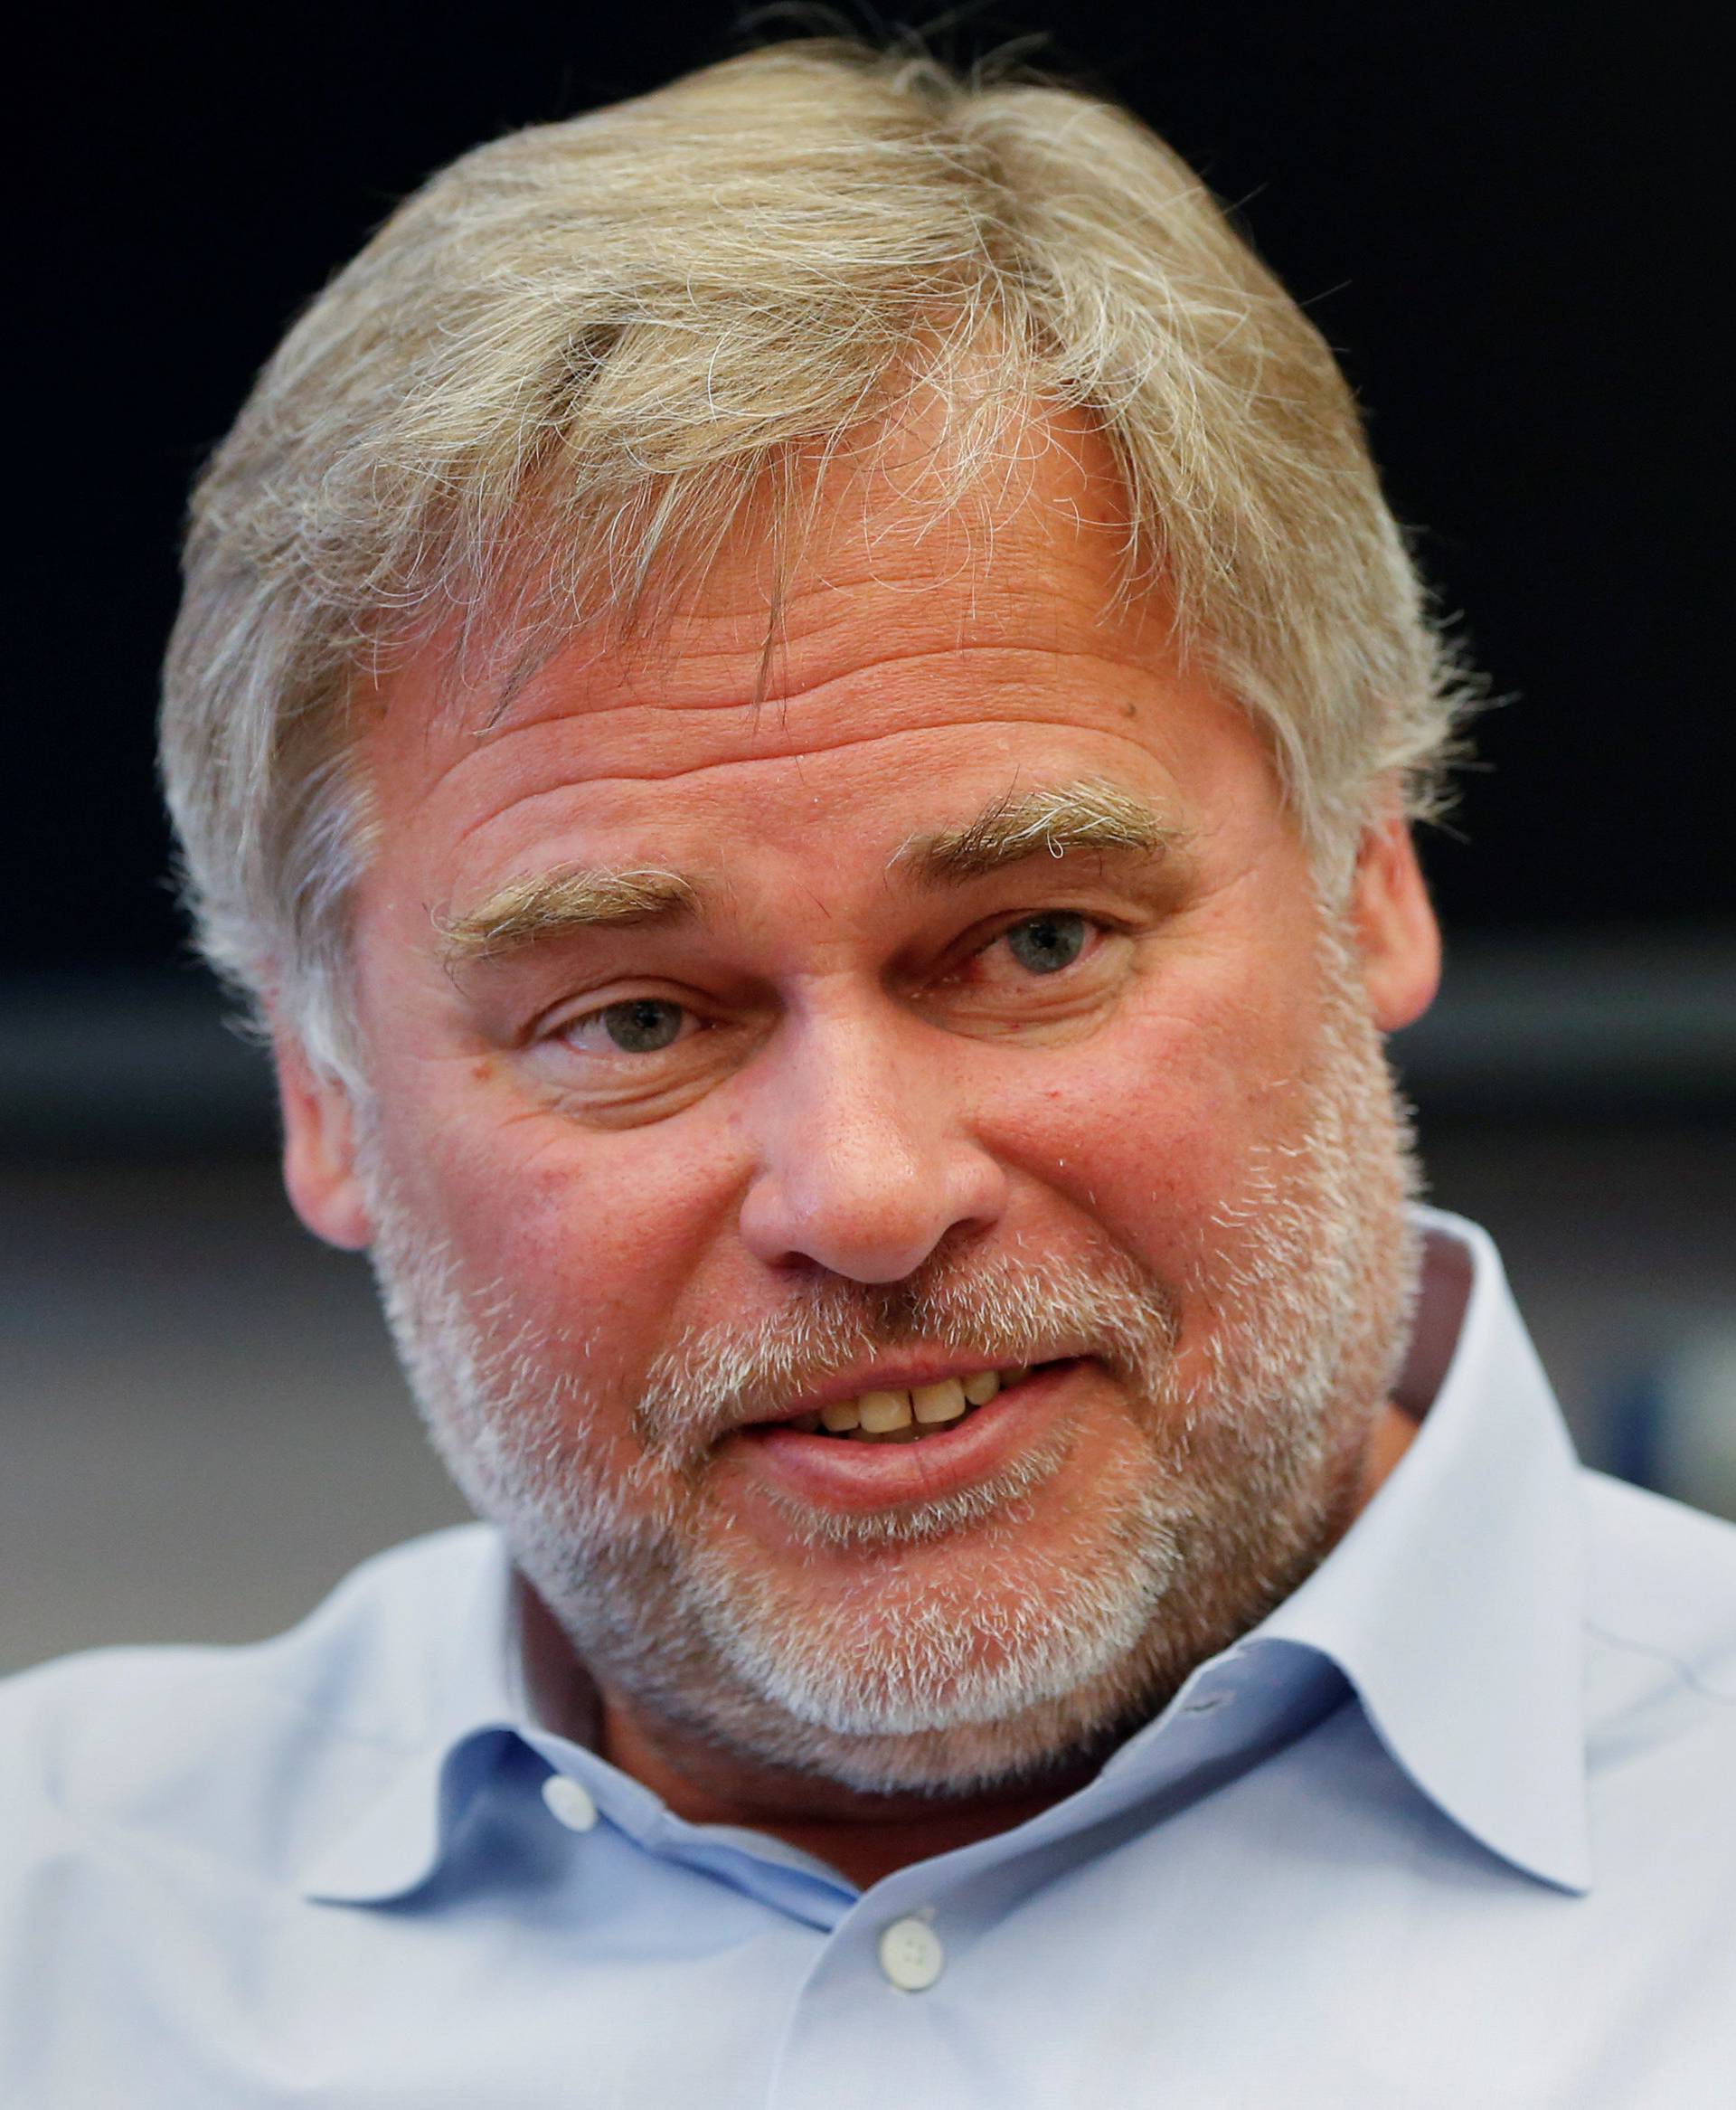 FILE PHOTO - Eugene Kaspersky, chairman and CEO of Kaspersky Lab during an interview in New York